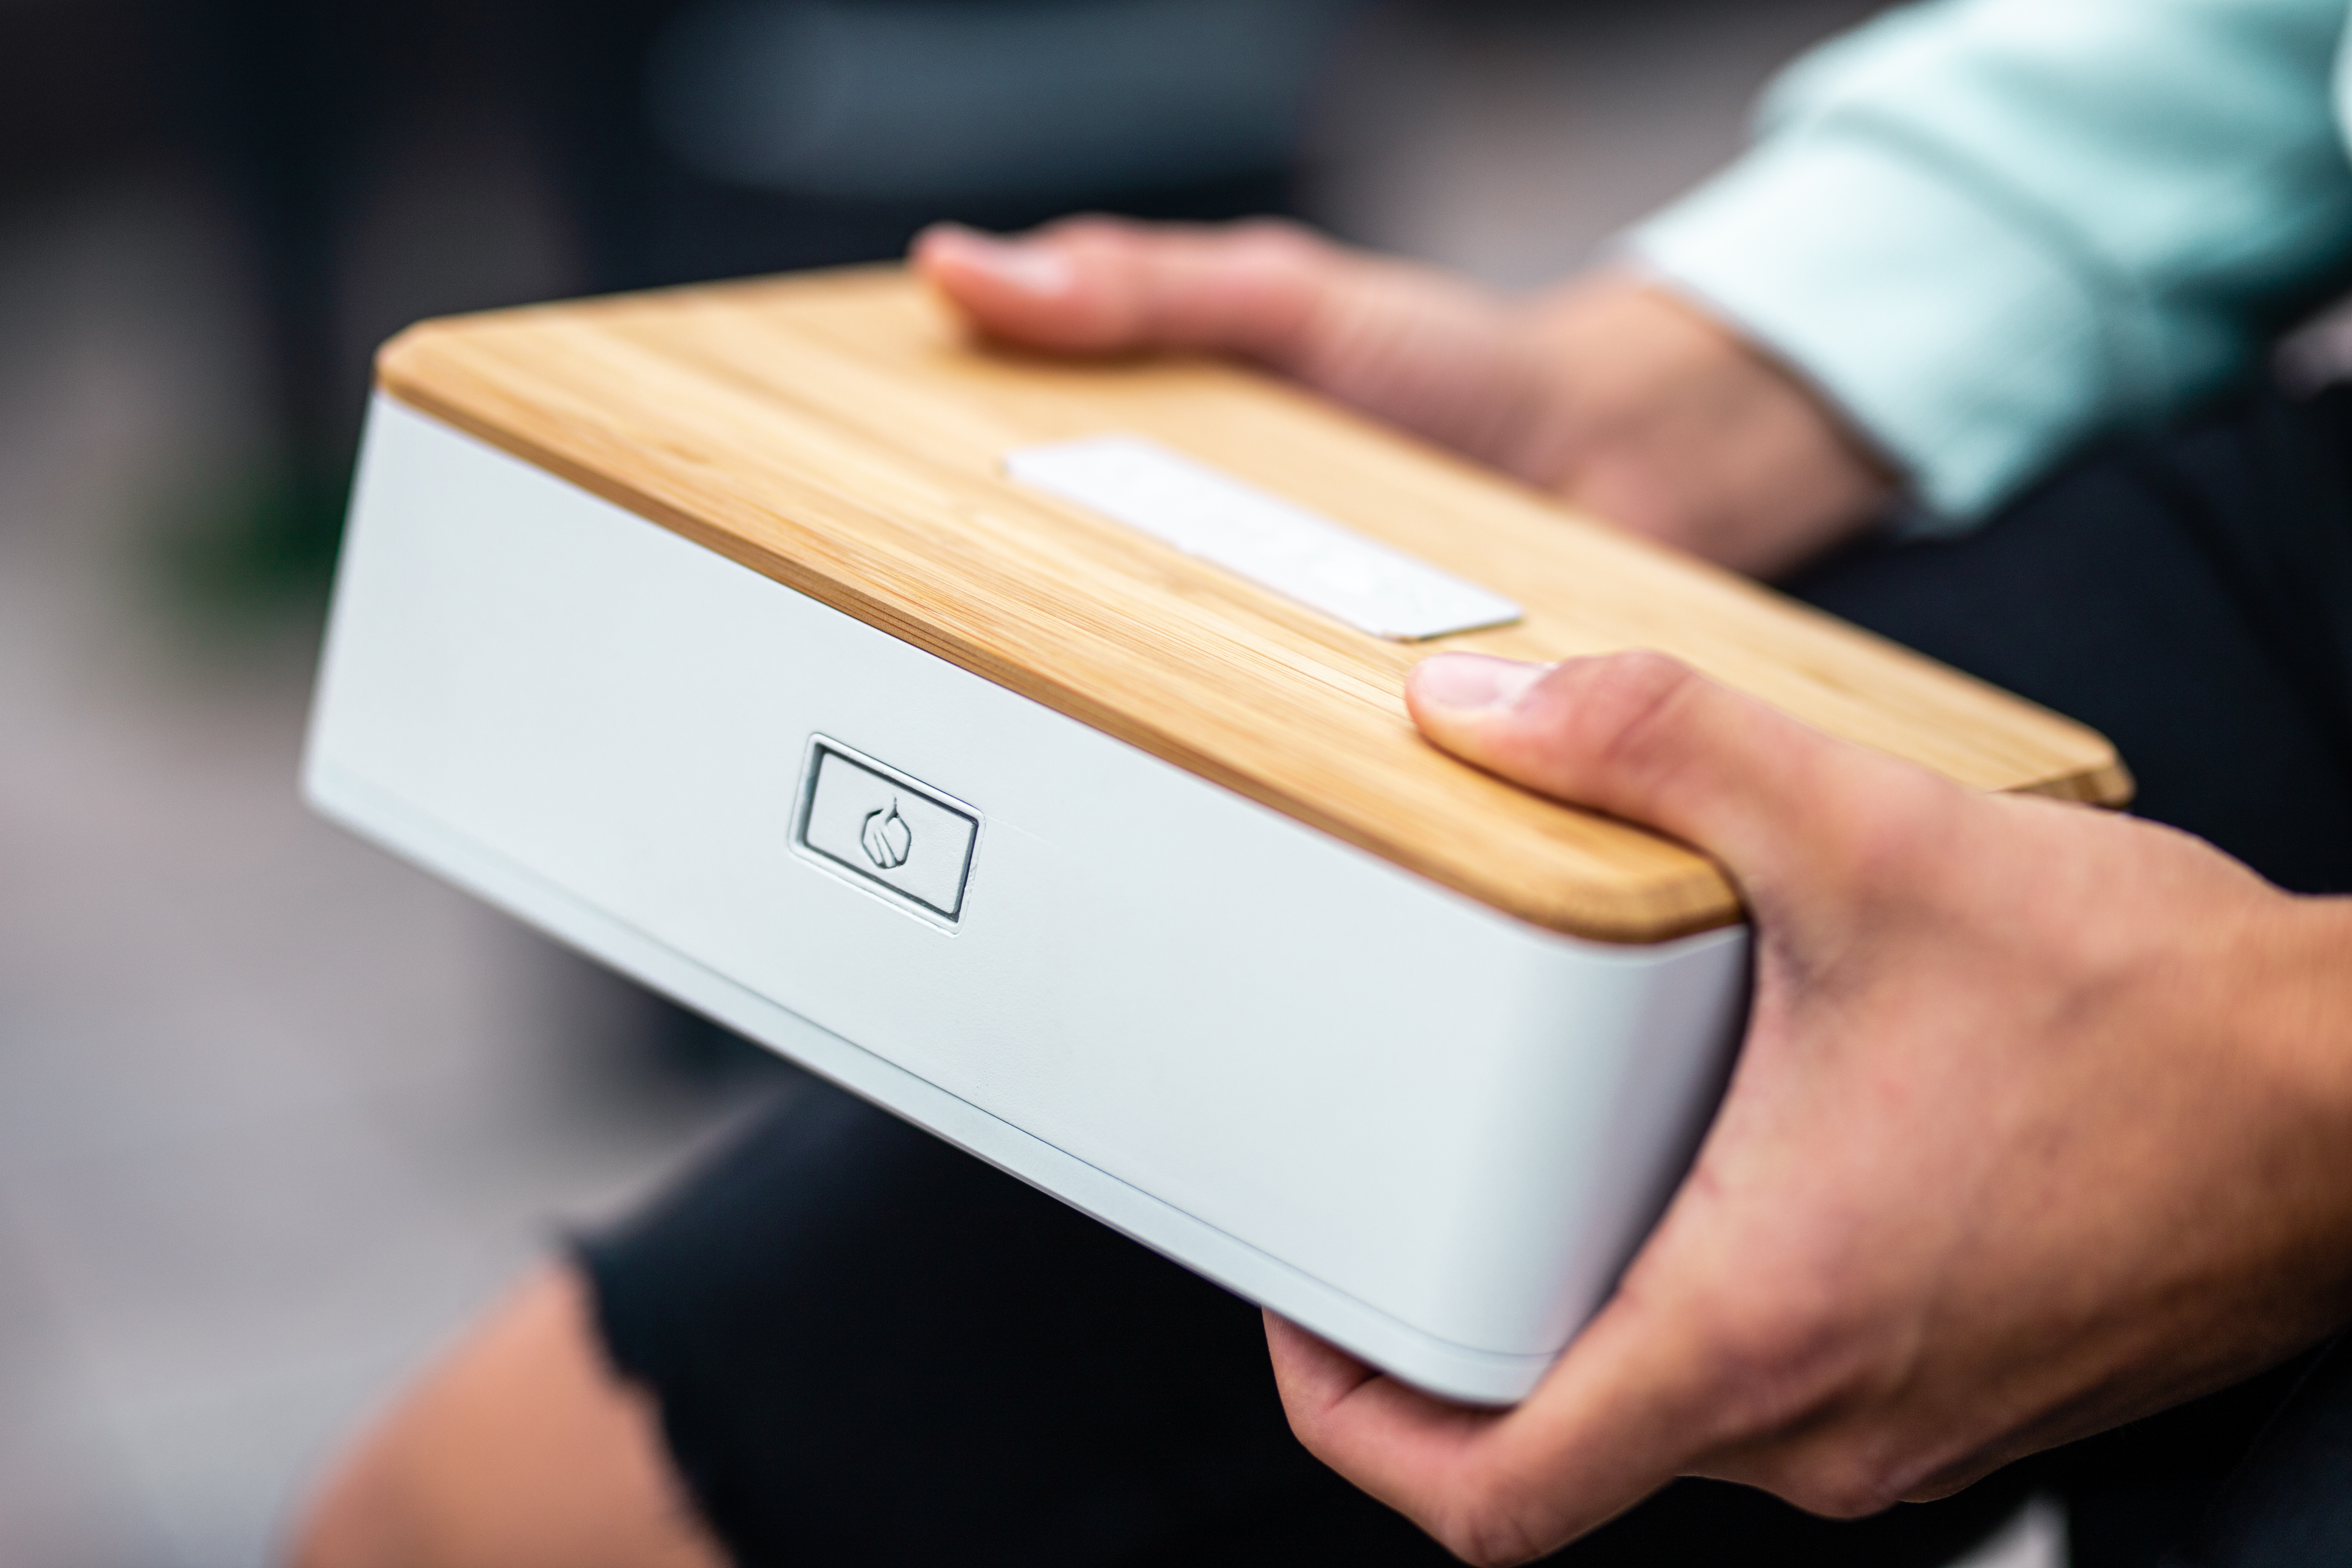 Introducing a New Lunchbox That Will Heat Your Food When You're Ready